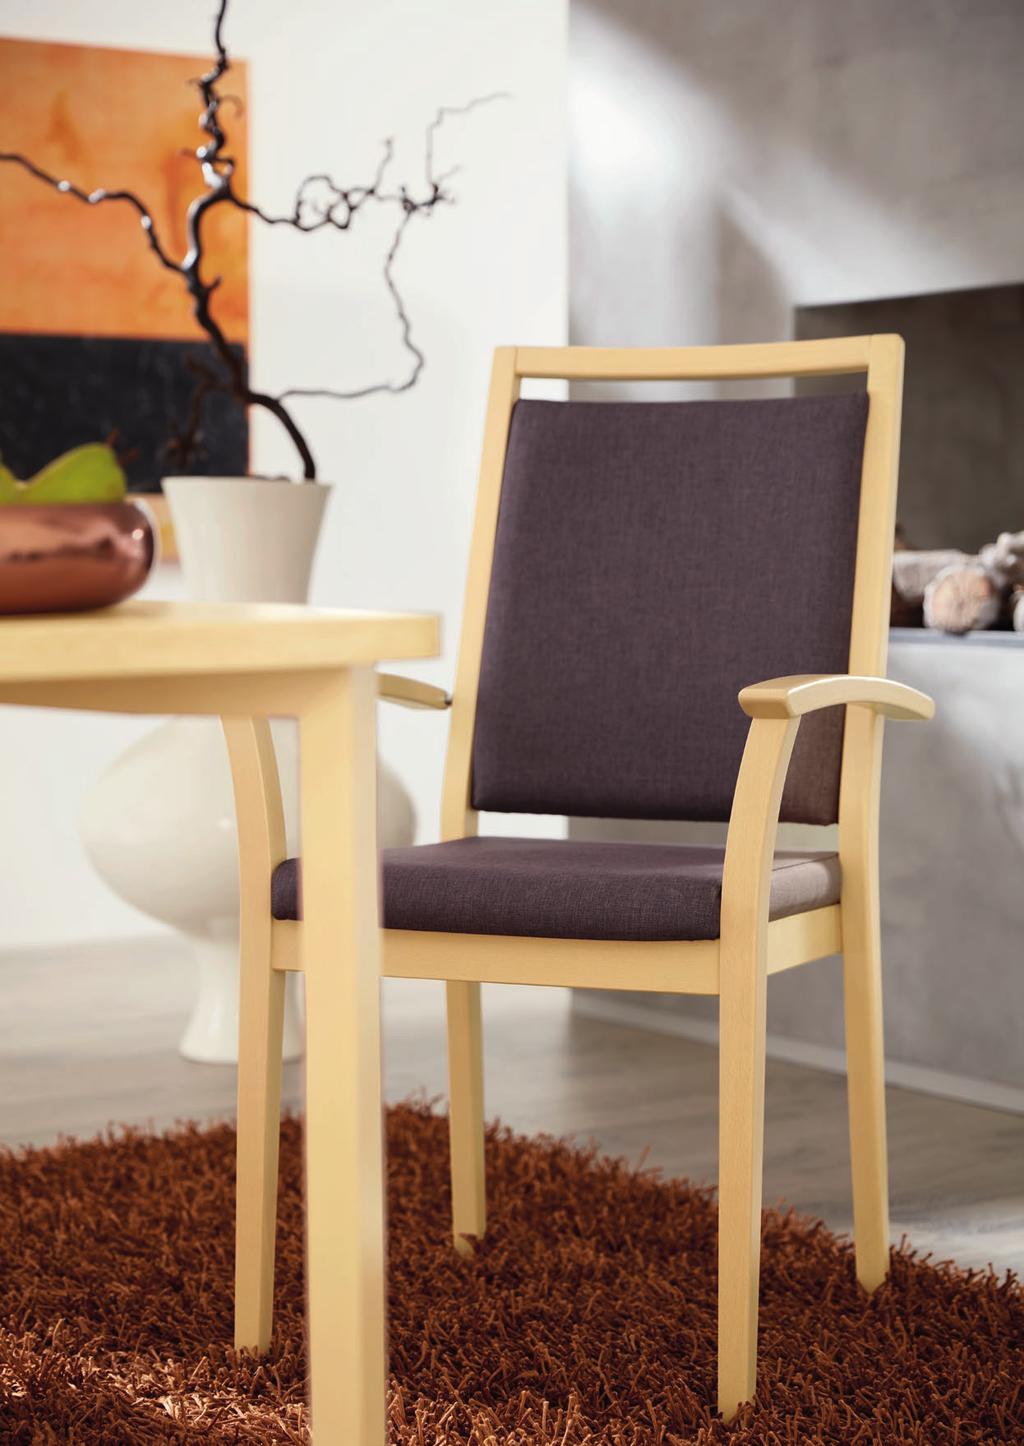 Our Mavo chairs also feature a handle as standard above the backrest, which provides a welcome extra support for residents and care staff when